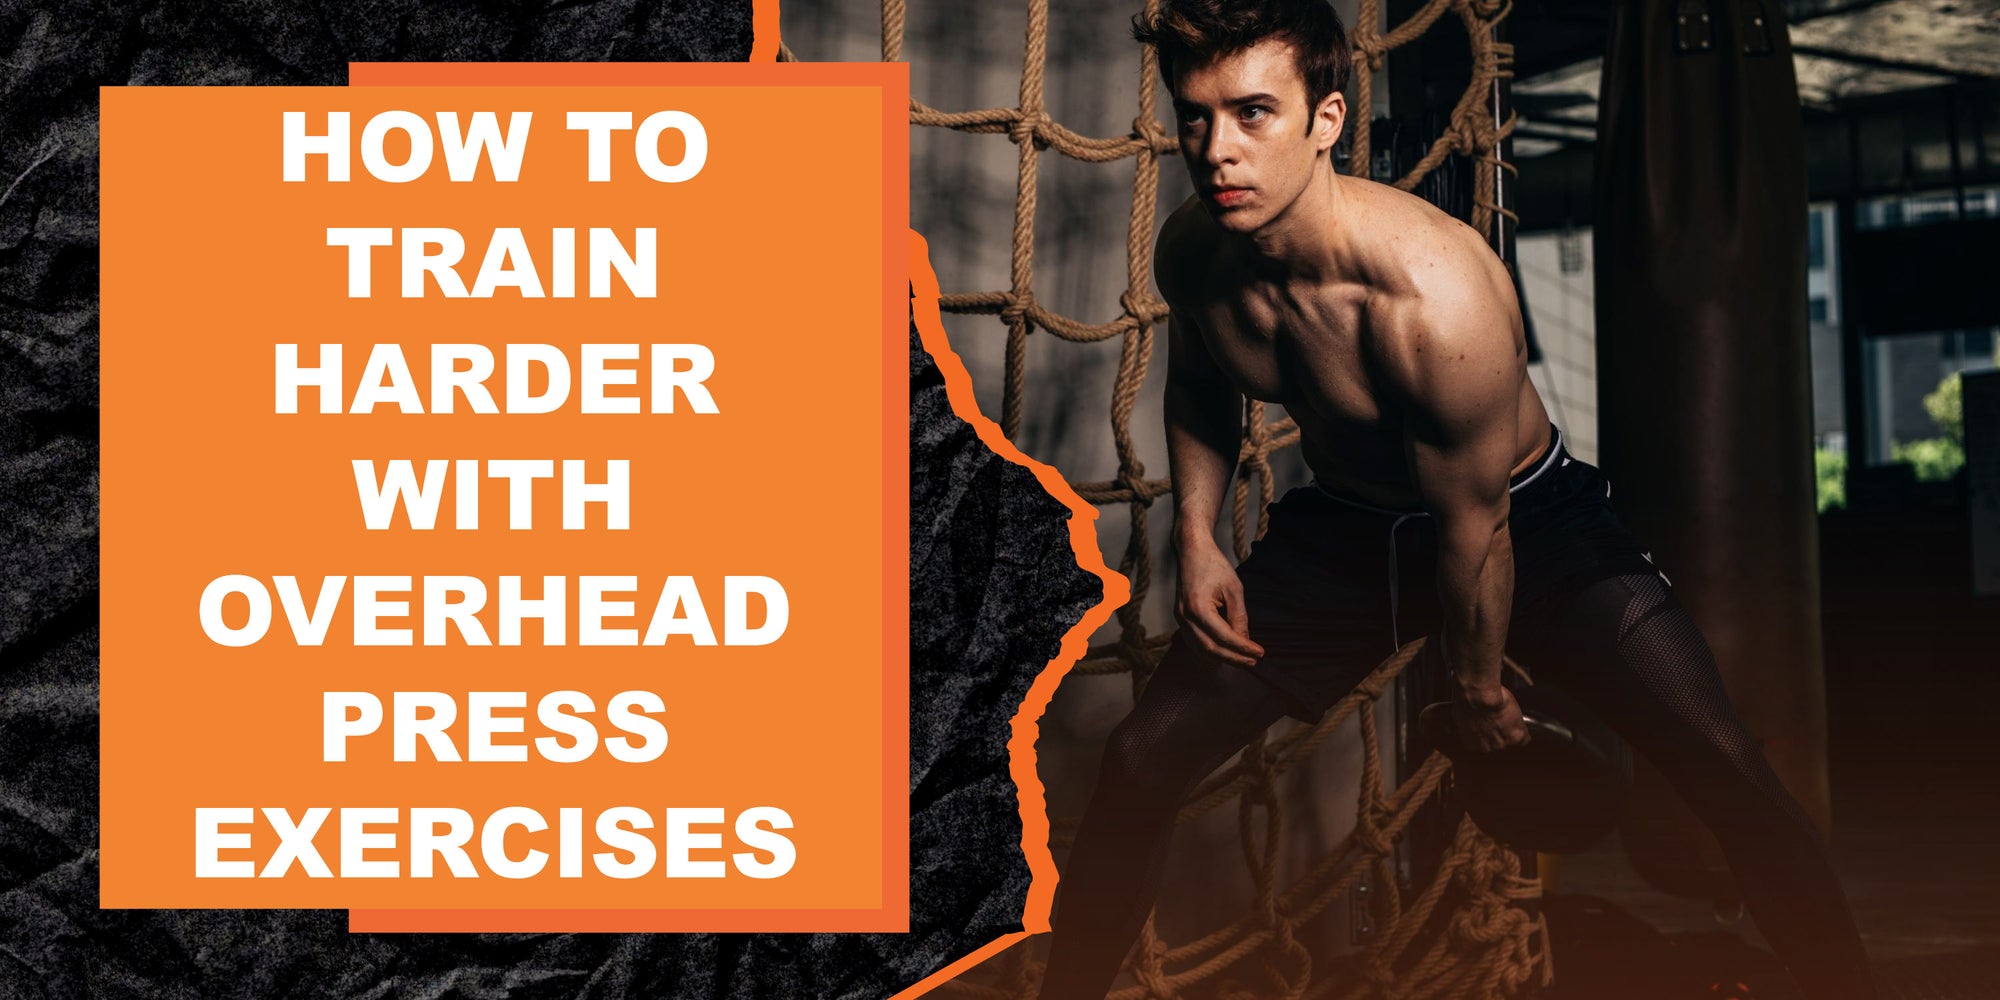 How to Train Harder with Overhead Press Exercises